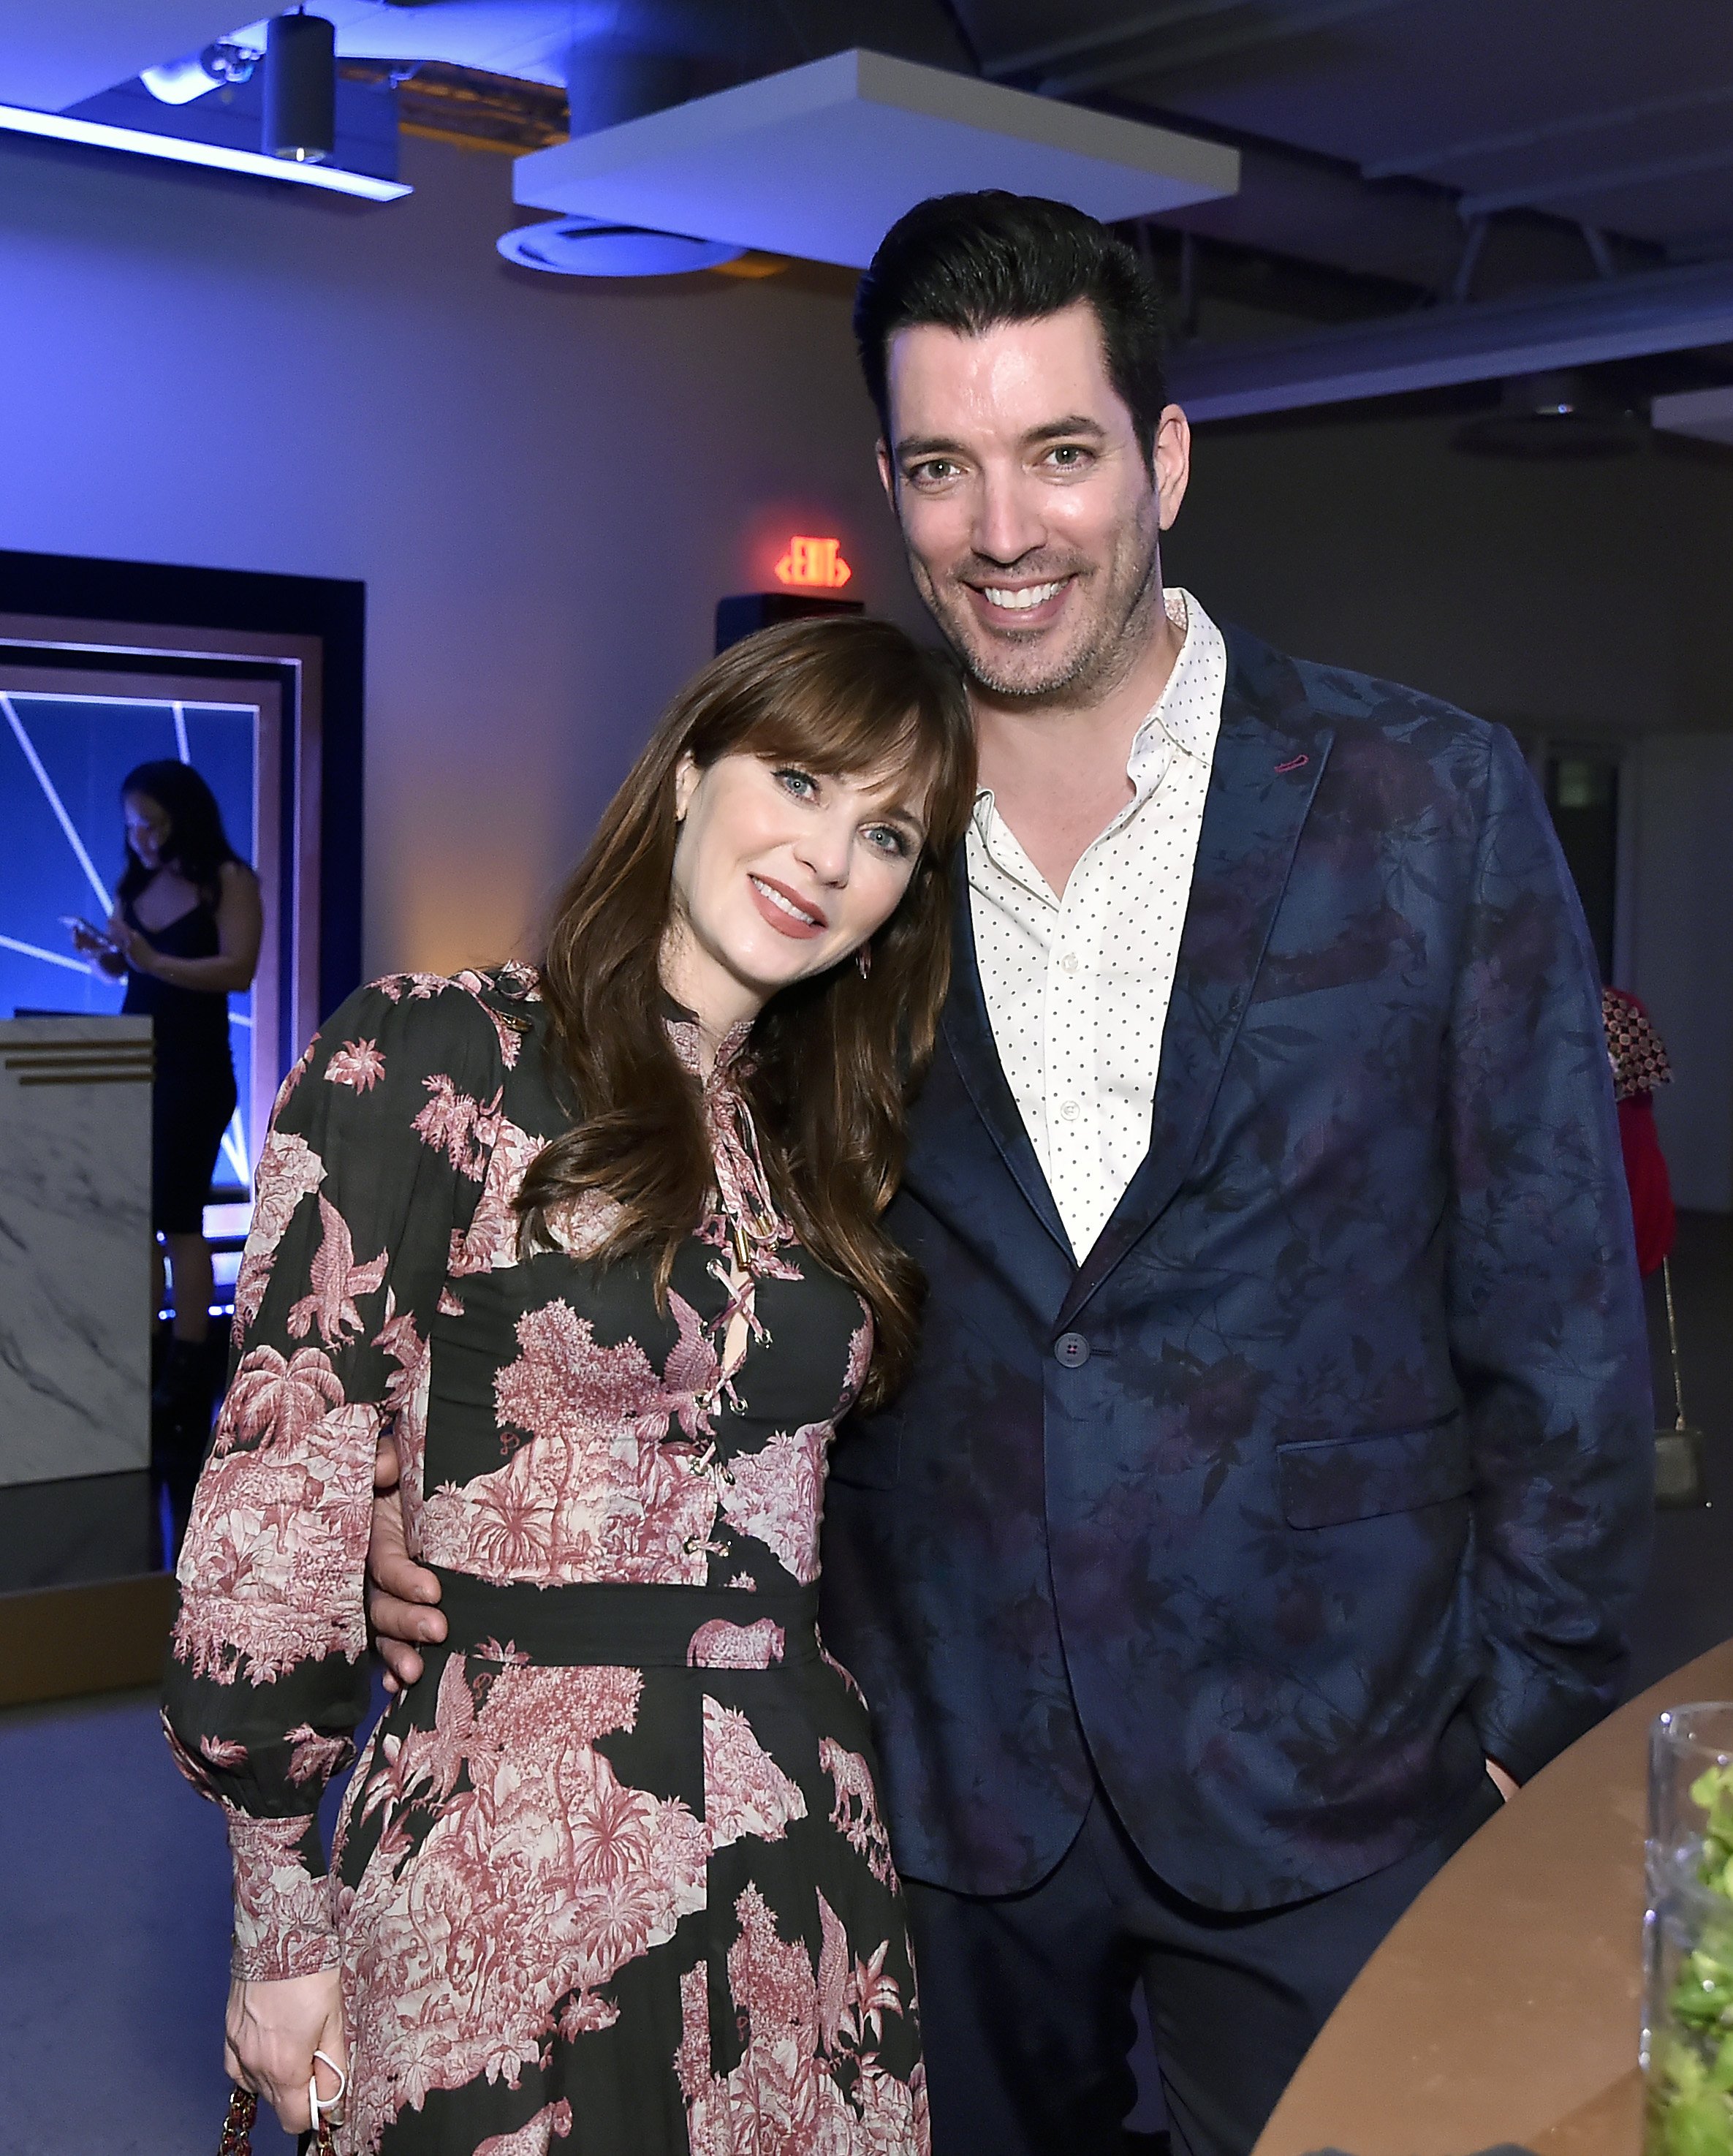 Zooey Deschanel and Jonathan Scott at the Academy Museum of Motion Pictures and Vanity Fair Premiere party at Academy Museum of Motion Pictures on September 29, 2021 in Los Angeles, California. | Source: Getty Images